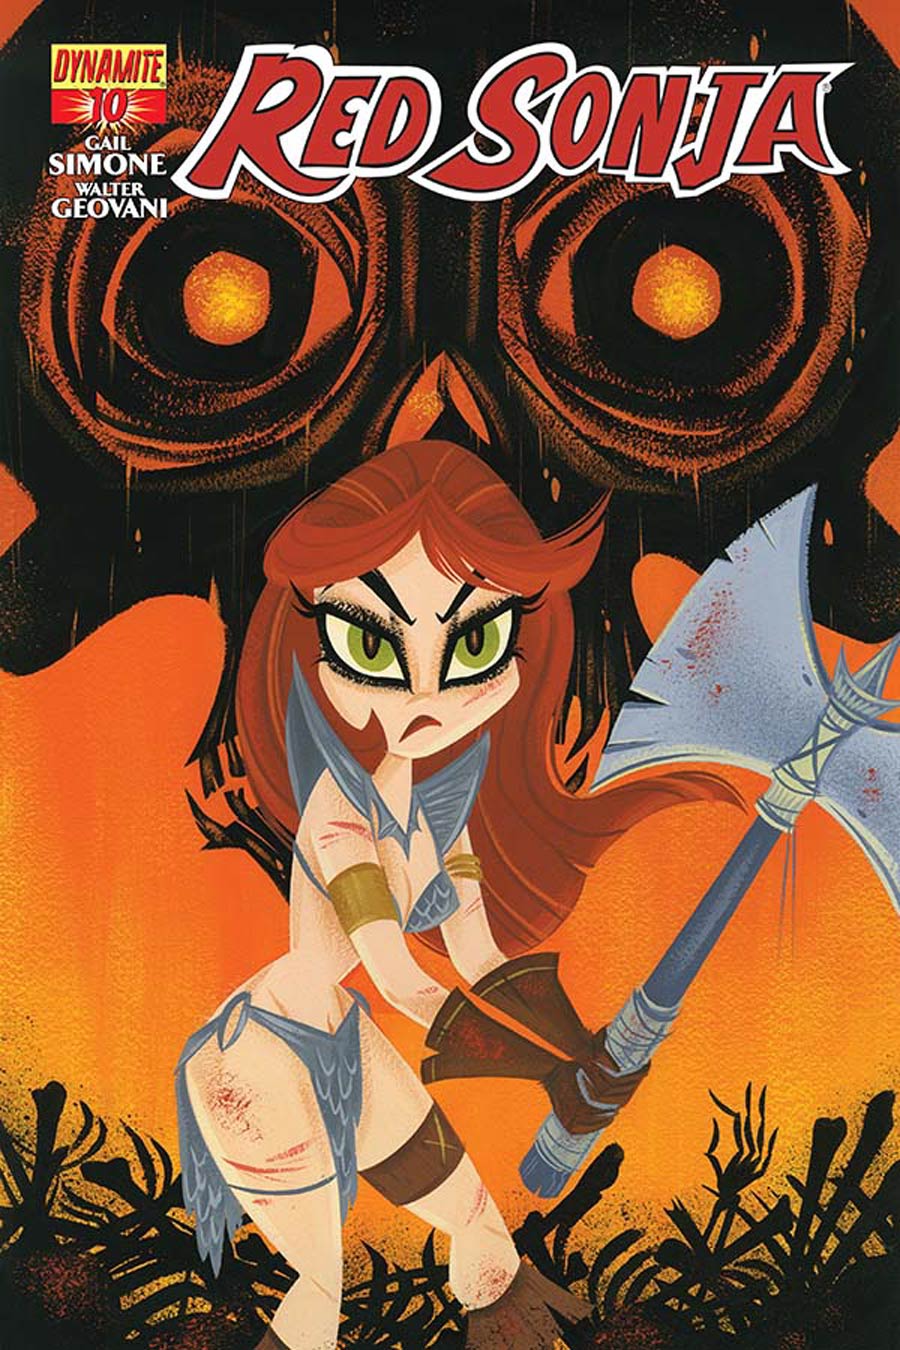 Red Sonja Vol 5 #10 Cover C Variant Stephanie Buscema Subscription Cover